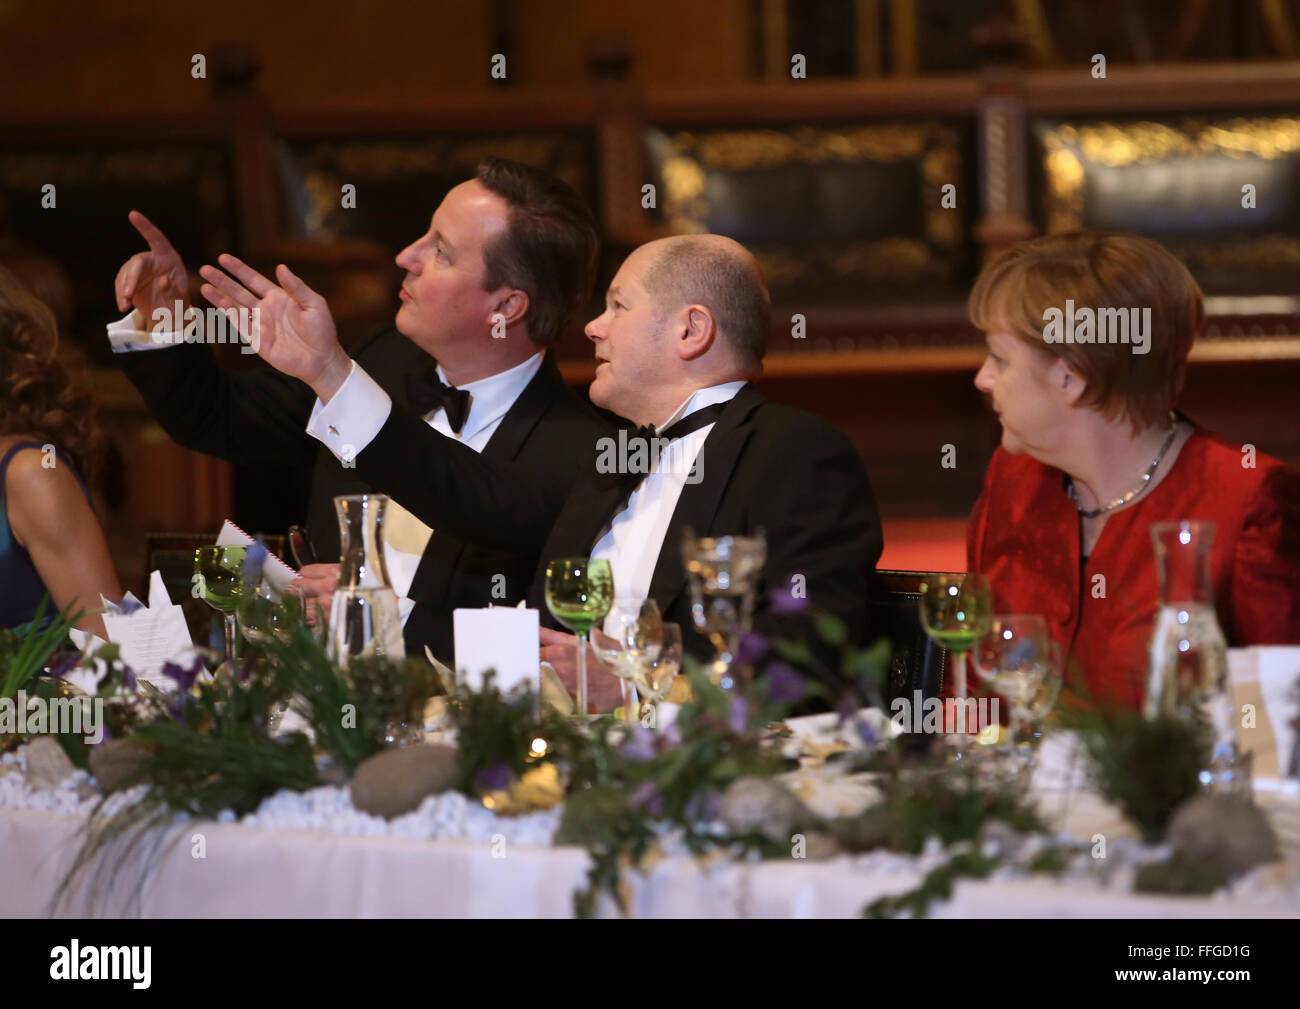 Hamburg, Germany. 12th Feb, 2016. German Chancellor Angela Merkel (R-L), Hamburg's First Mayor Olaf Scholz and Britain's Prime Minister David Cameron talk at the annual Matthiae dinner at the city hall of Hamburg, Germany, 12 February 2016. Britain's Prime Minister David Cameron and German Chancellor Angela Merkel are guests of honour at the oldest feast in the world. Since 1356, the leaders of the Hansa city invite distinguished guests to the Matthiae dinner. Photo: CHRISTIAN CHARISIUS/dpa/Alamy Live News Stock Photo